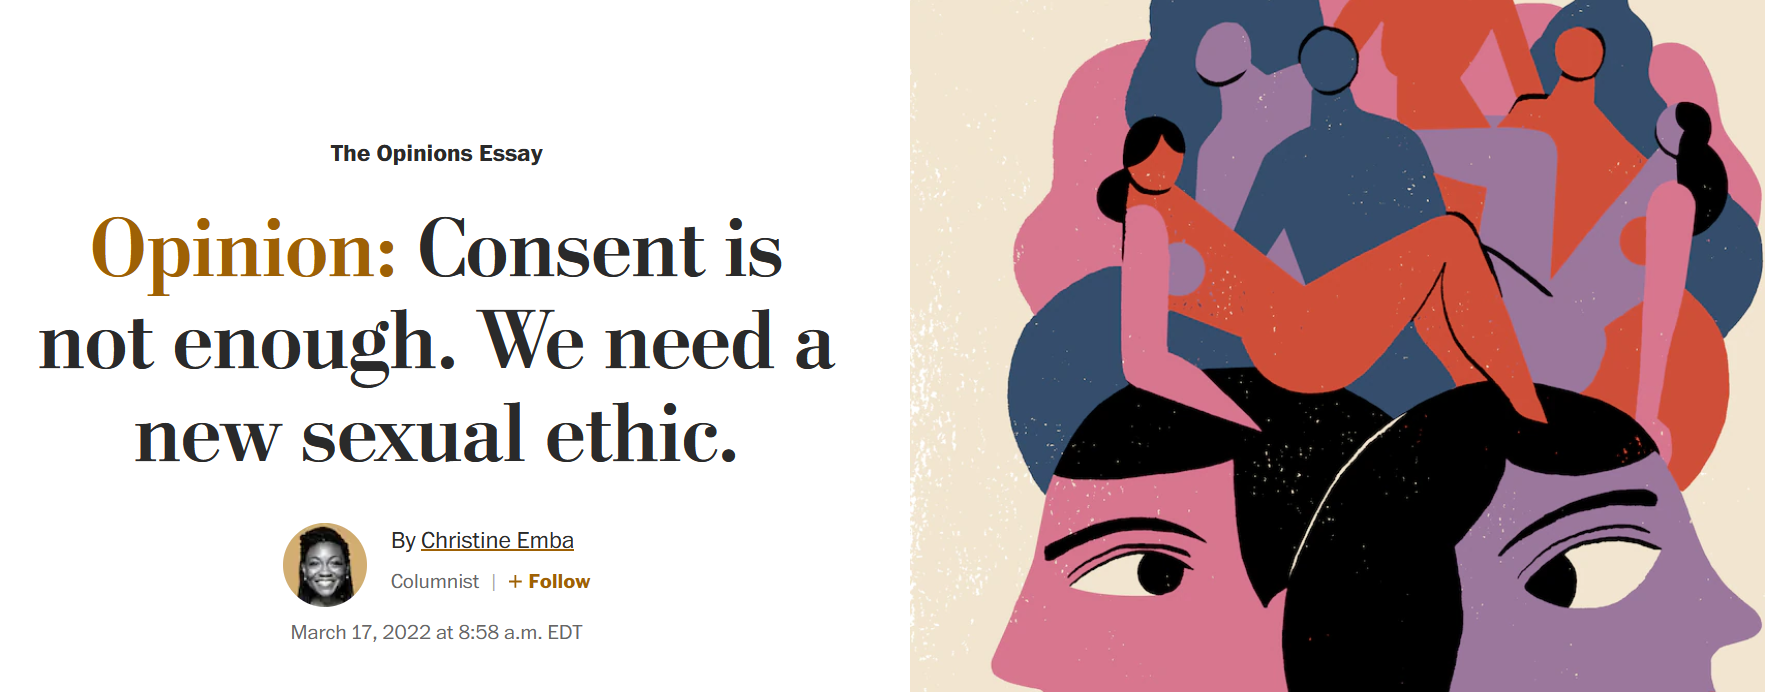 Jacqueline Fuck All - When the Washington Post Talks About Consent | Intimate Health Consulting